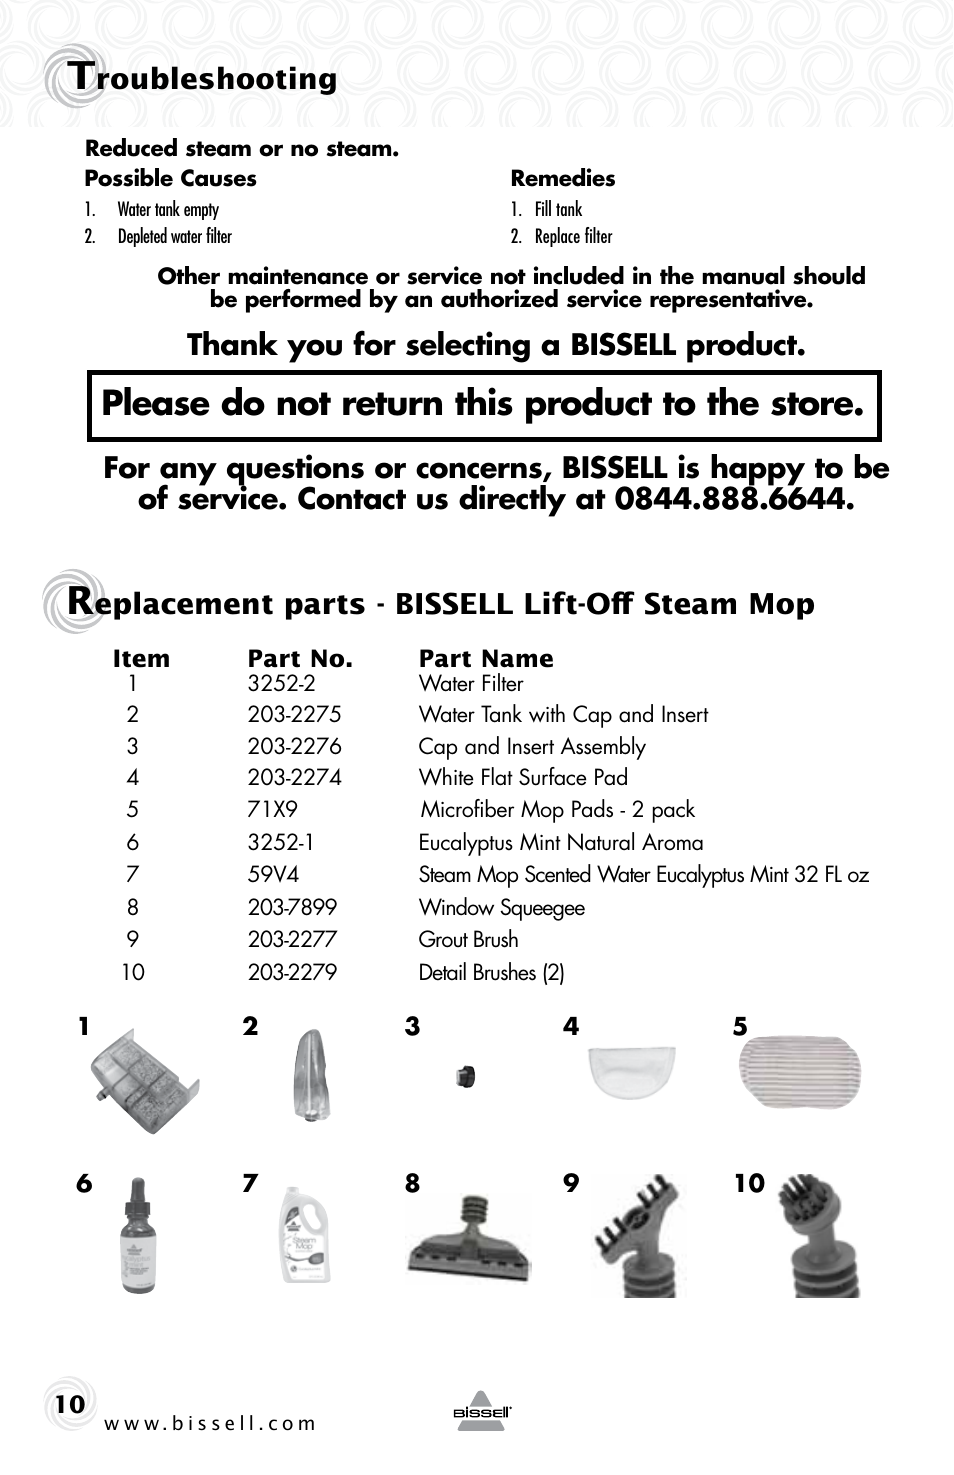 Please do not return this product to the store, Roubleshooting, Eplacement parts - bissell lift-off steam mop | Инструкция по эксплуатации Bissell Паровая швабра 2-в-1 со съемным ручным пароочистителем LIFT-Off STEAM MOP | Страница 10 / 24